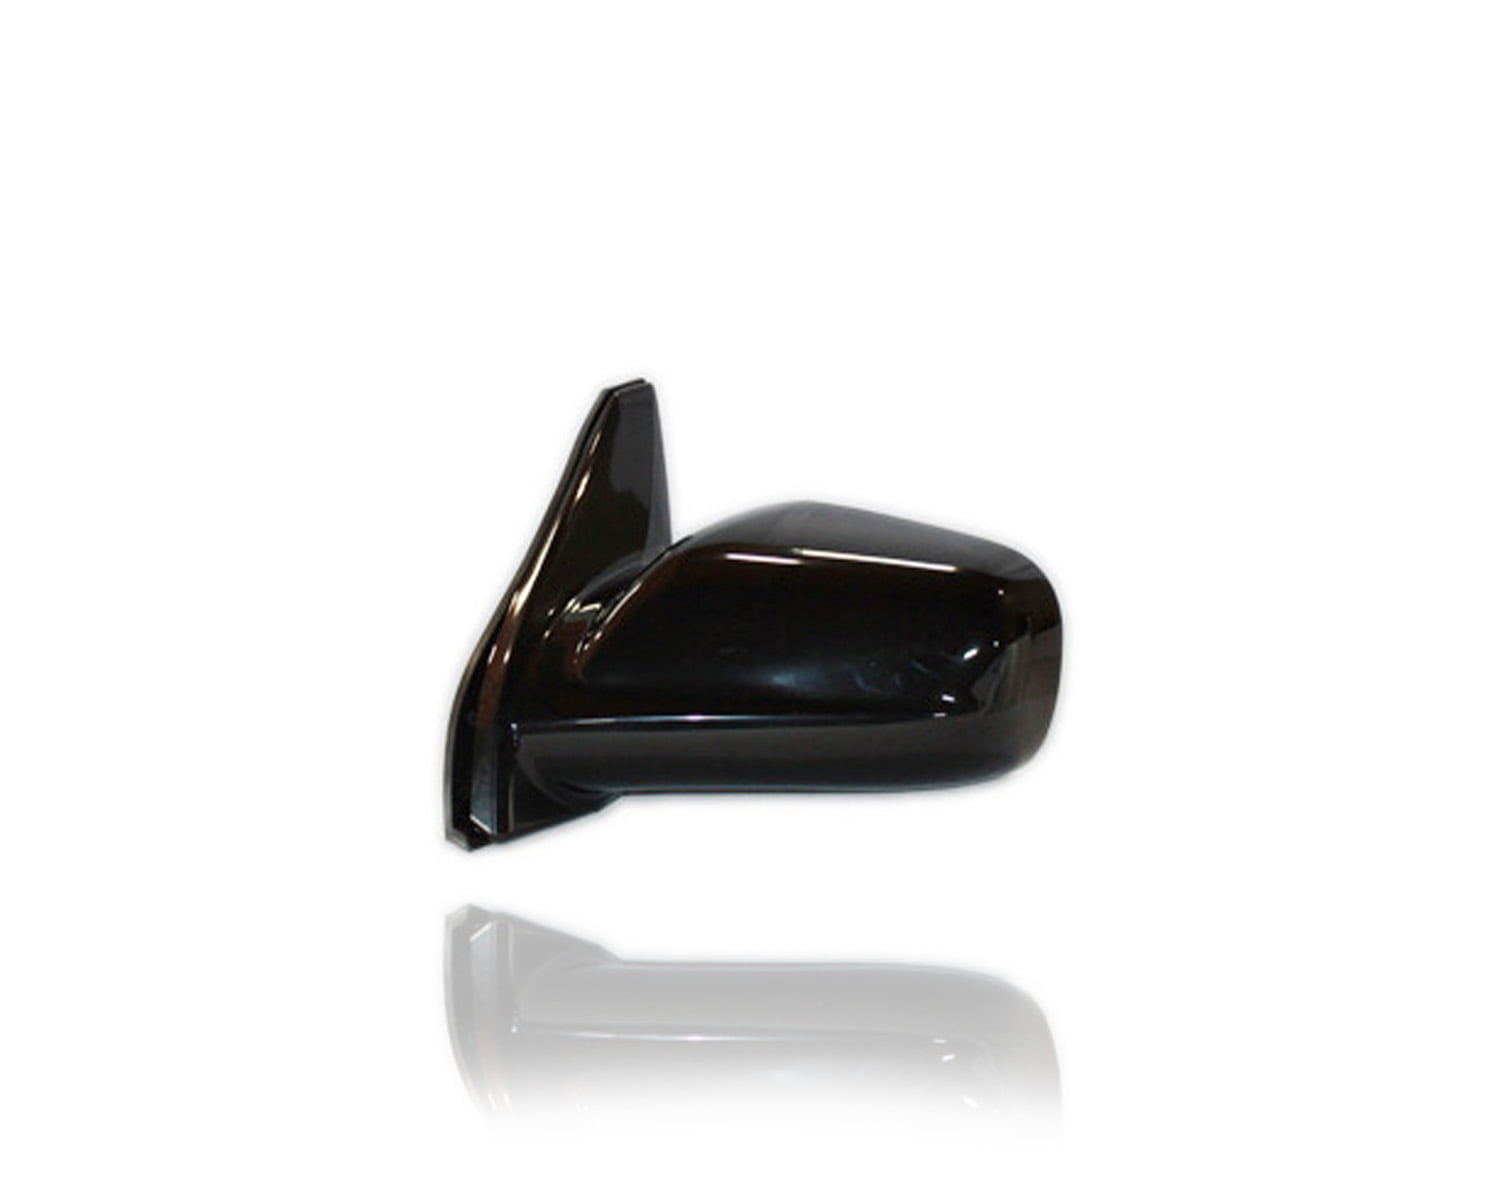 OE Replacement Toyota Matrix Passenger Side Mirror Outside Rear View Multiple Manufacturers Partslink Number TO1321259